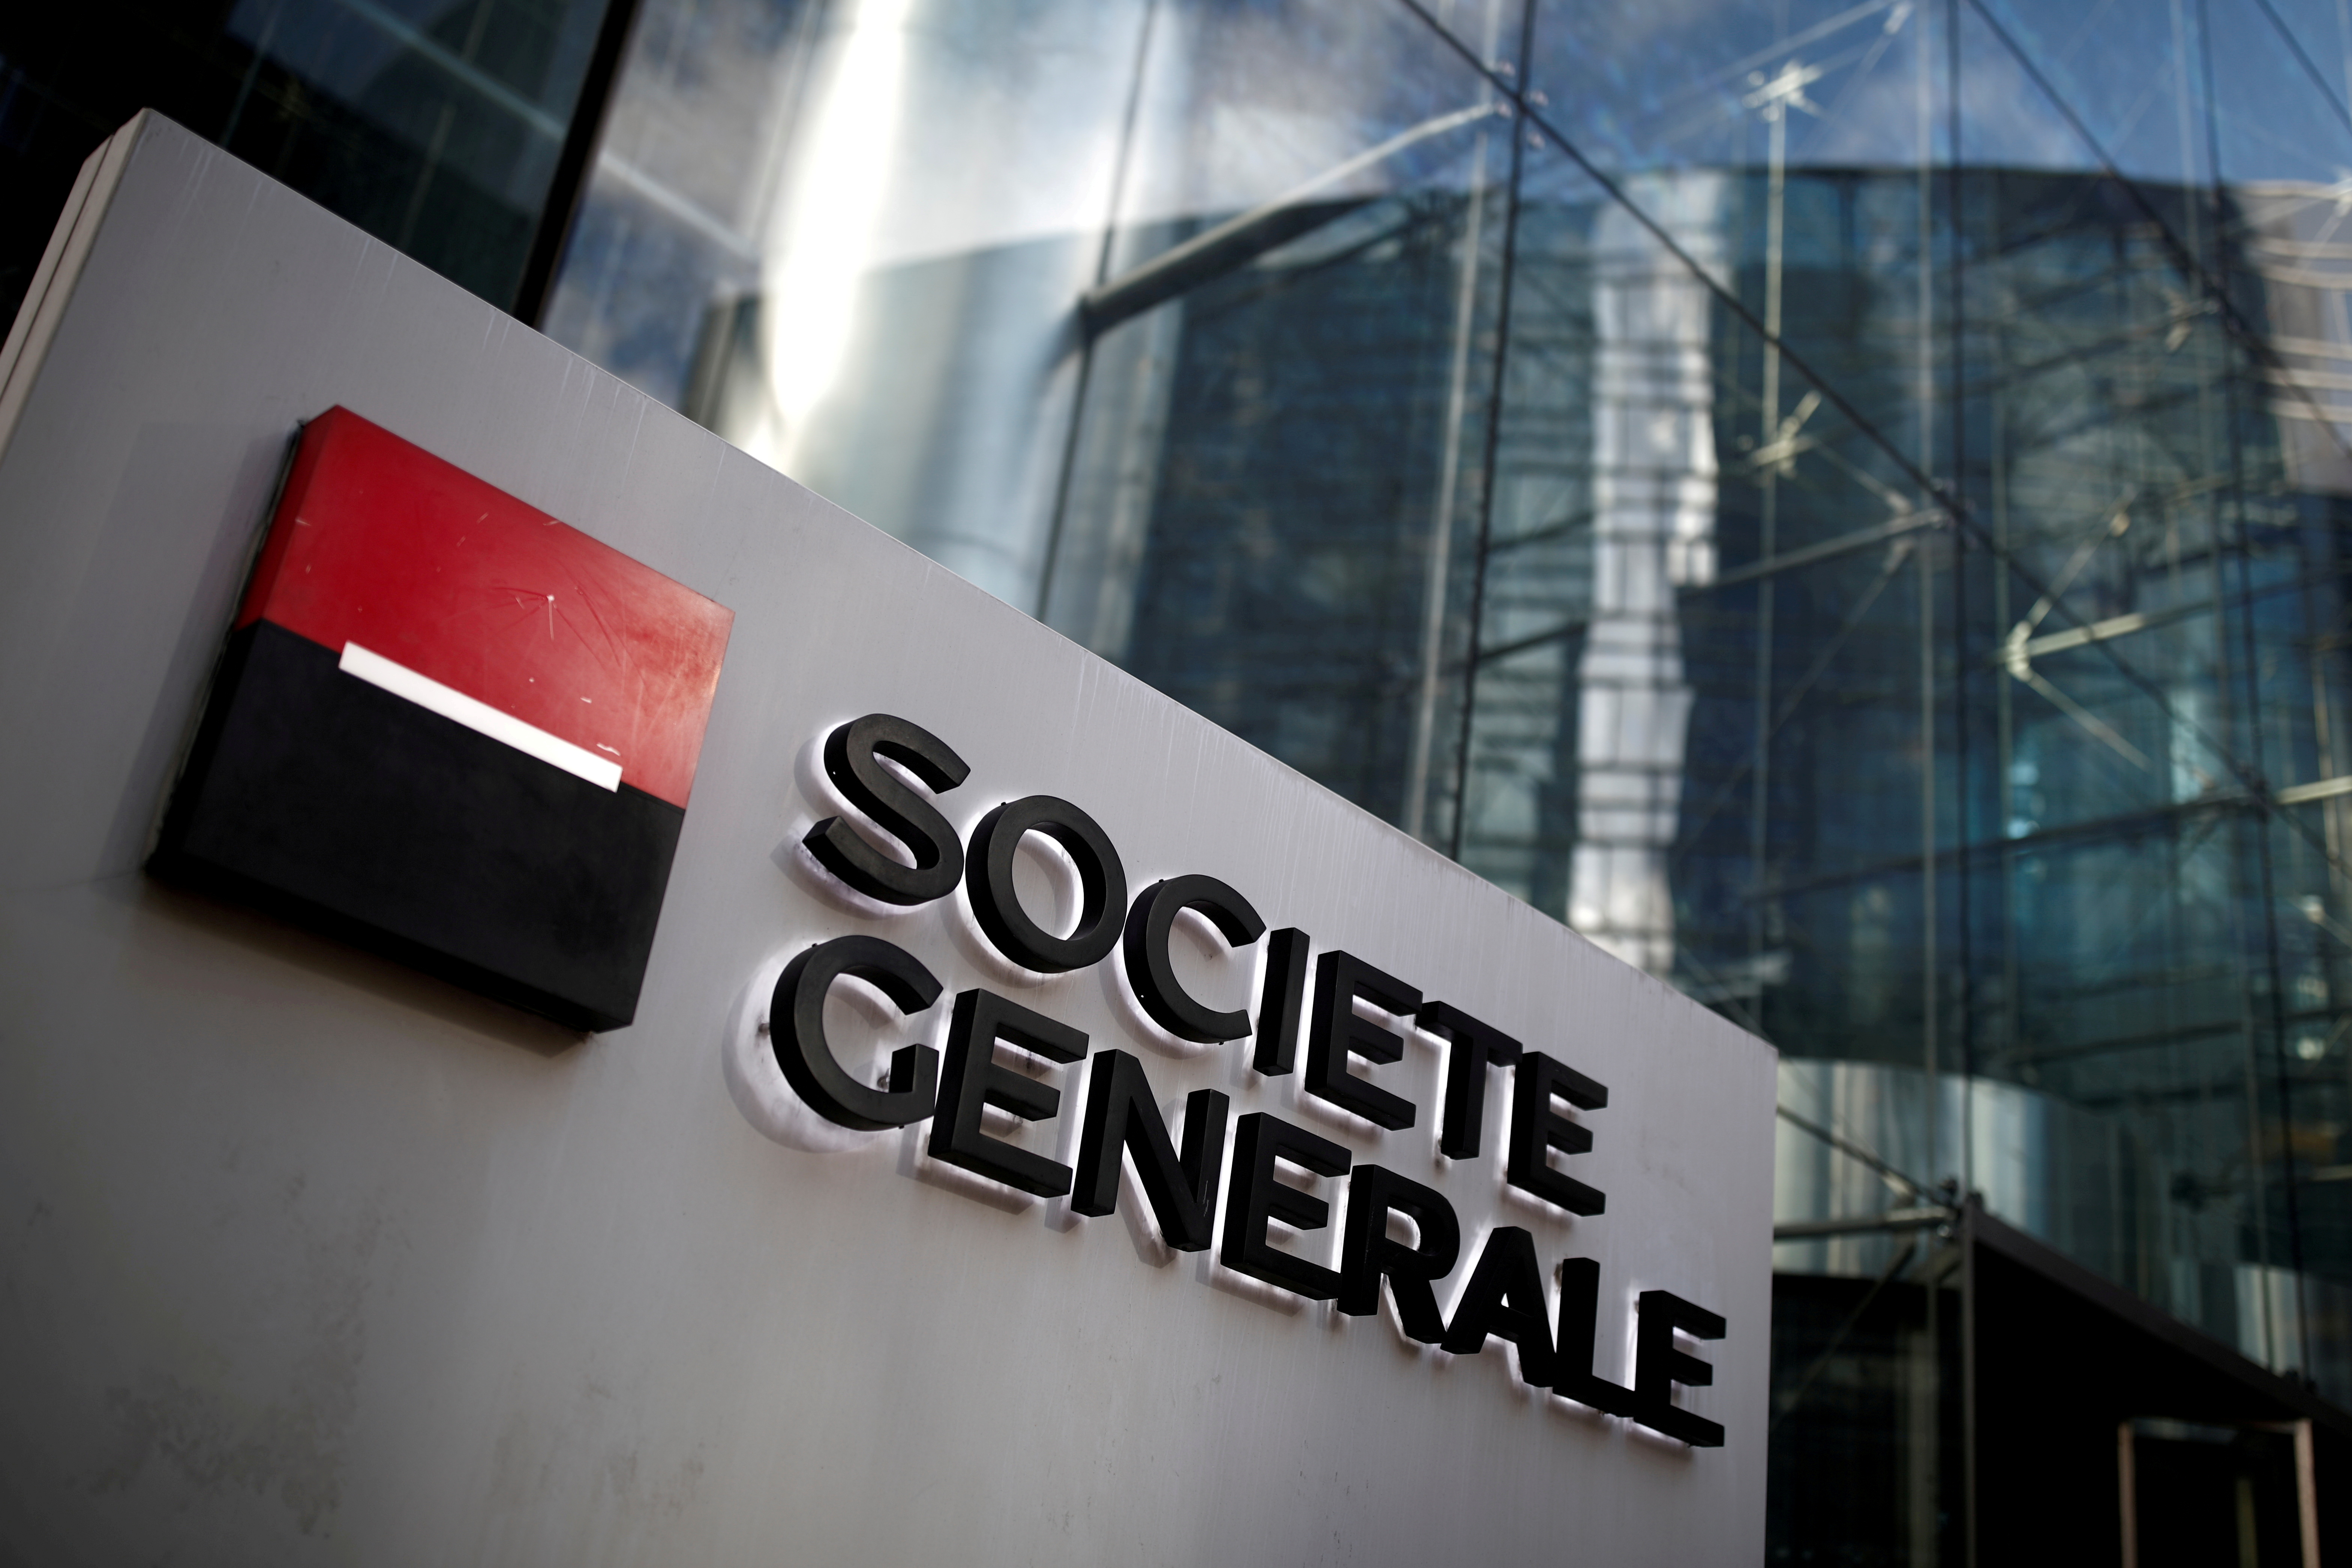 The logo of Societe Generale is seen on the headquarters at the financial and business district of La Defense near Paris, France, February 4, 2020. REUTERS/Benoit Tessier